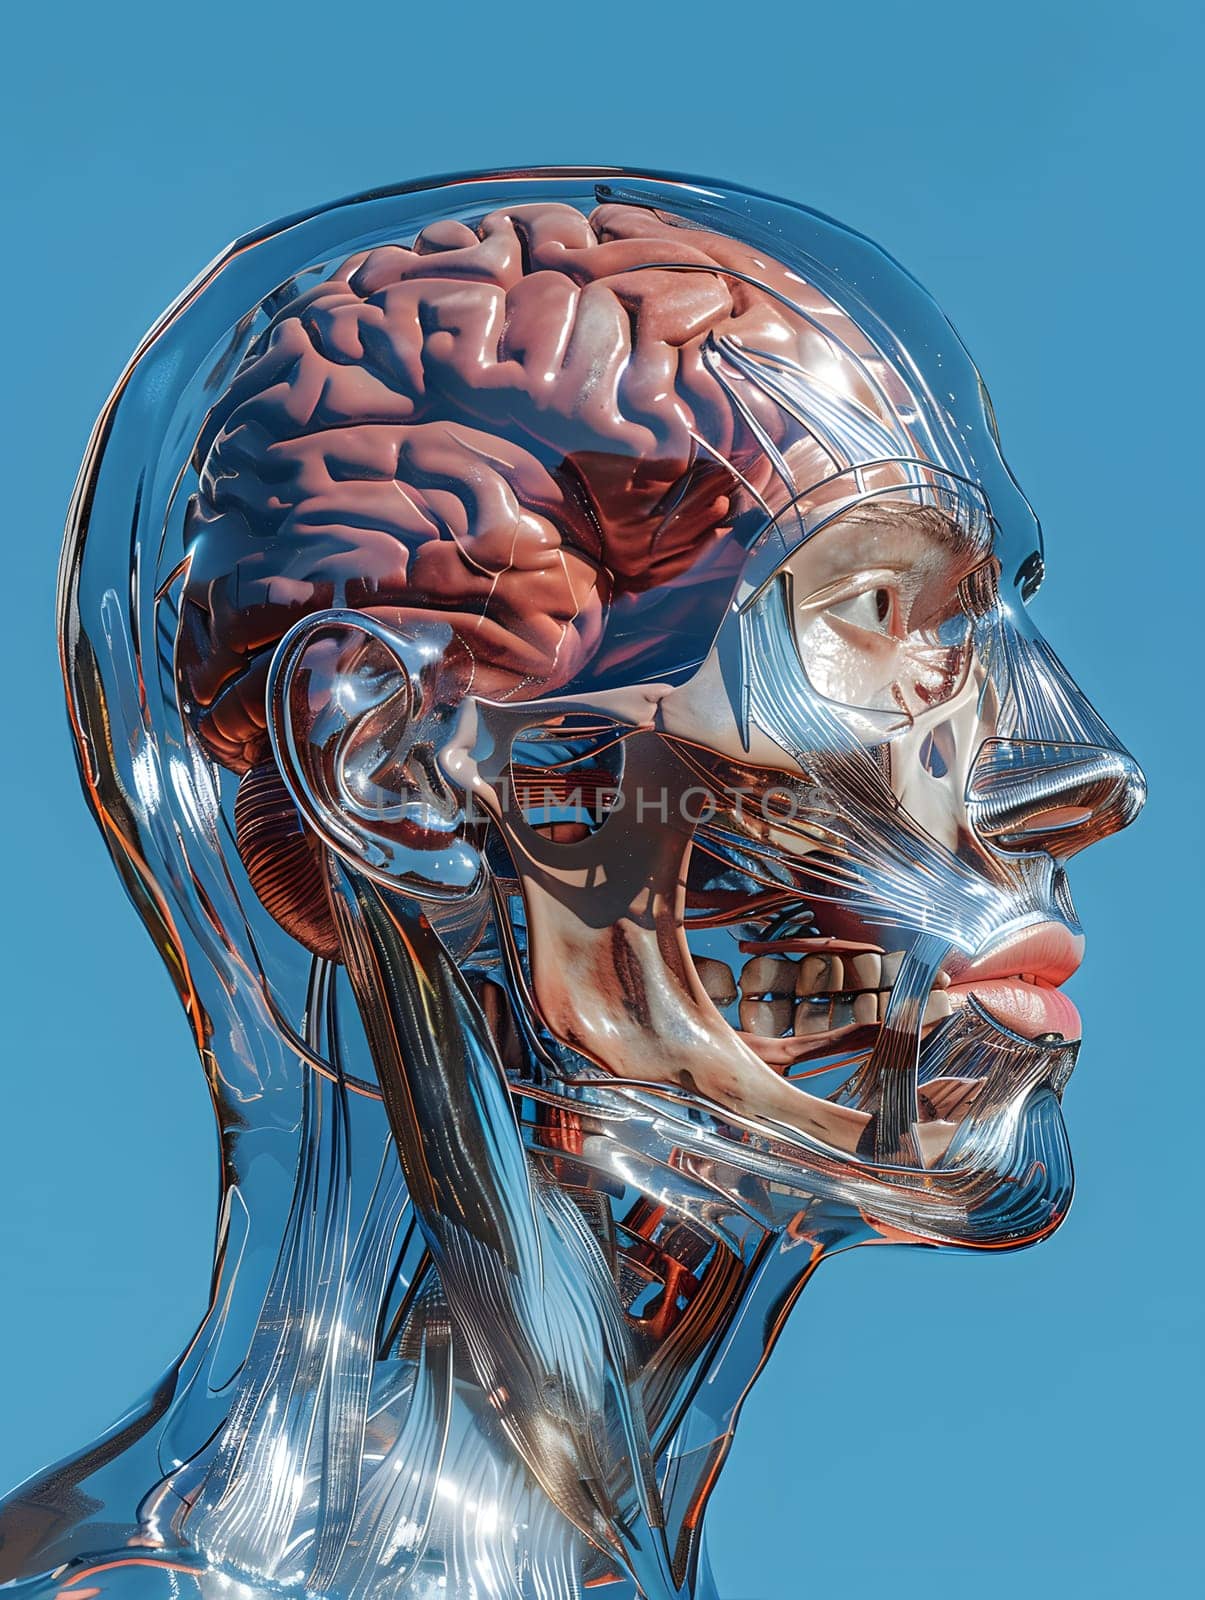 A glass head displaying human anatomy with visible brain, muscles, jaw, neck, and eye, creating a unique artistic gesture of the human body organism